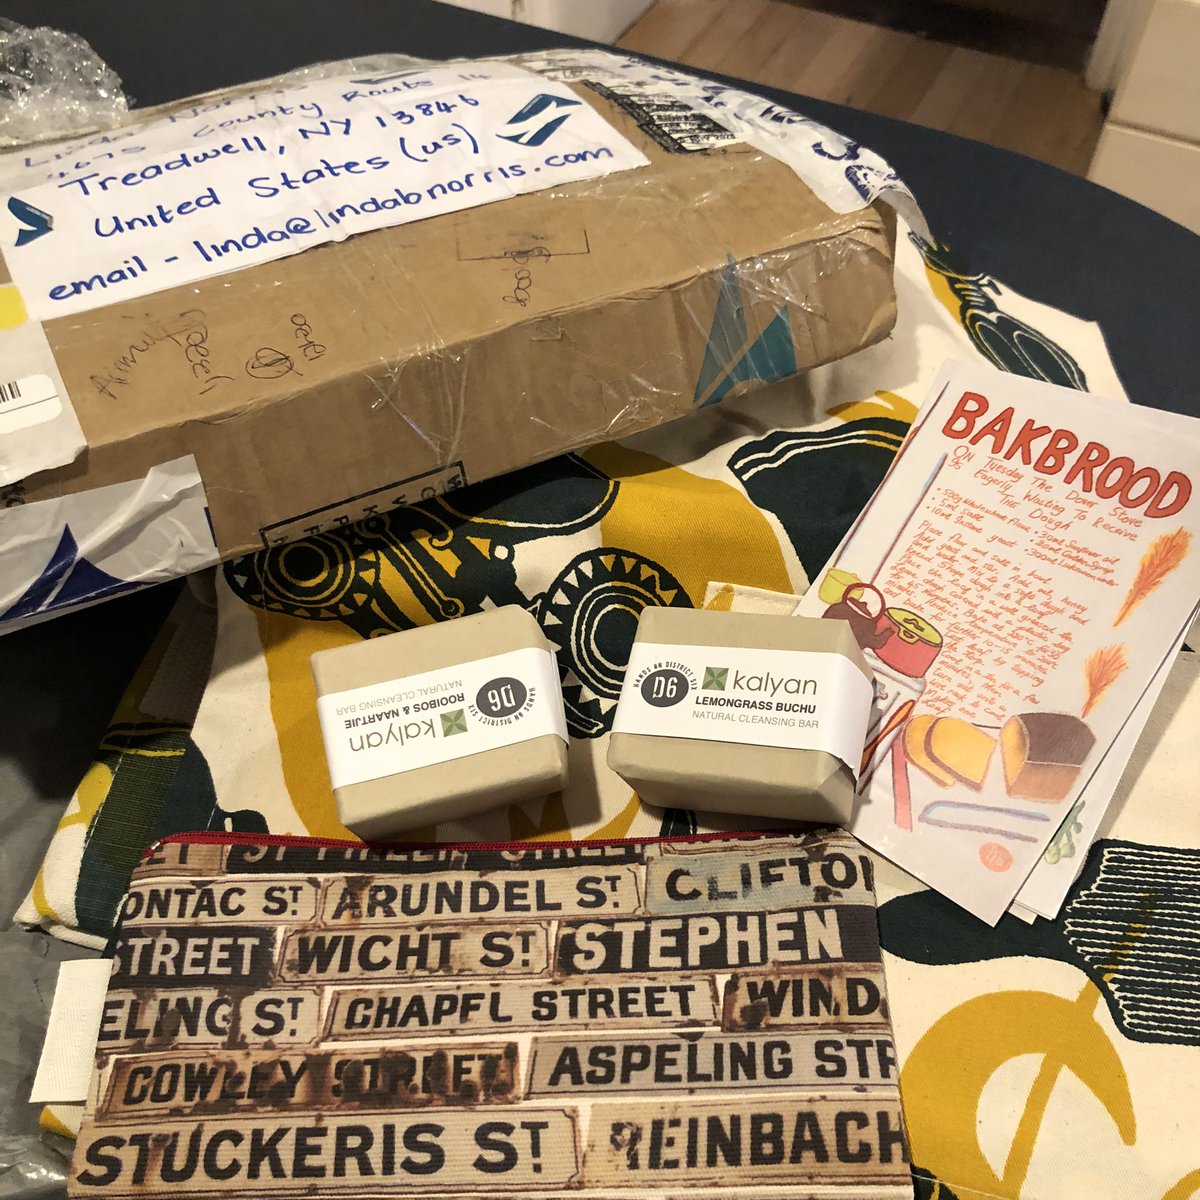 A reminder that #museumshops have great gifts: took a bit of time but my wonderful items from @District6Museum arrived today! Thank you for shipping! Shop globally and locally! @SitesConscience